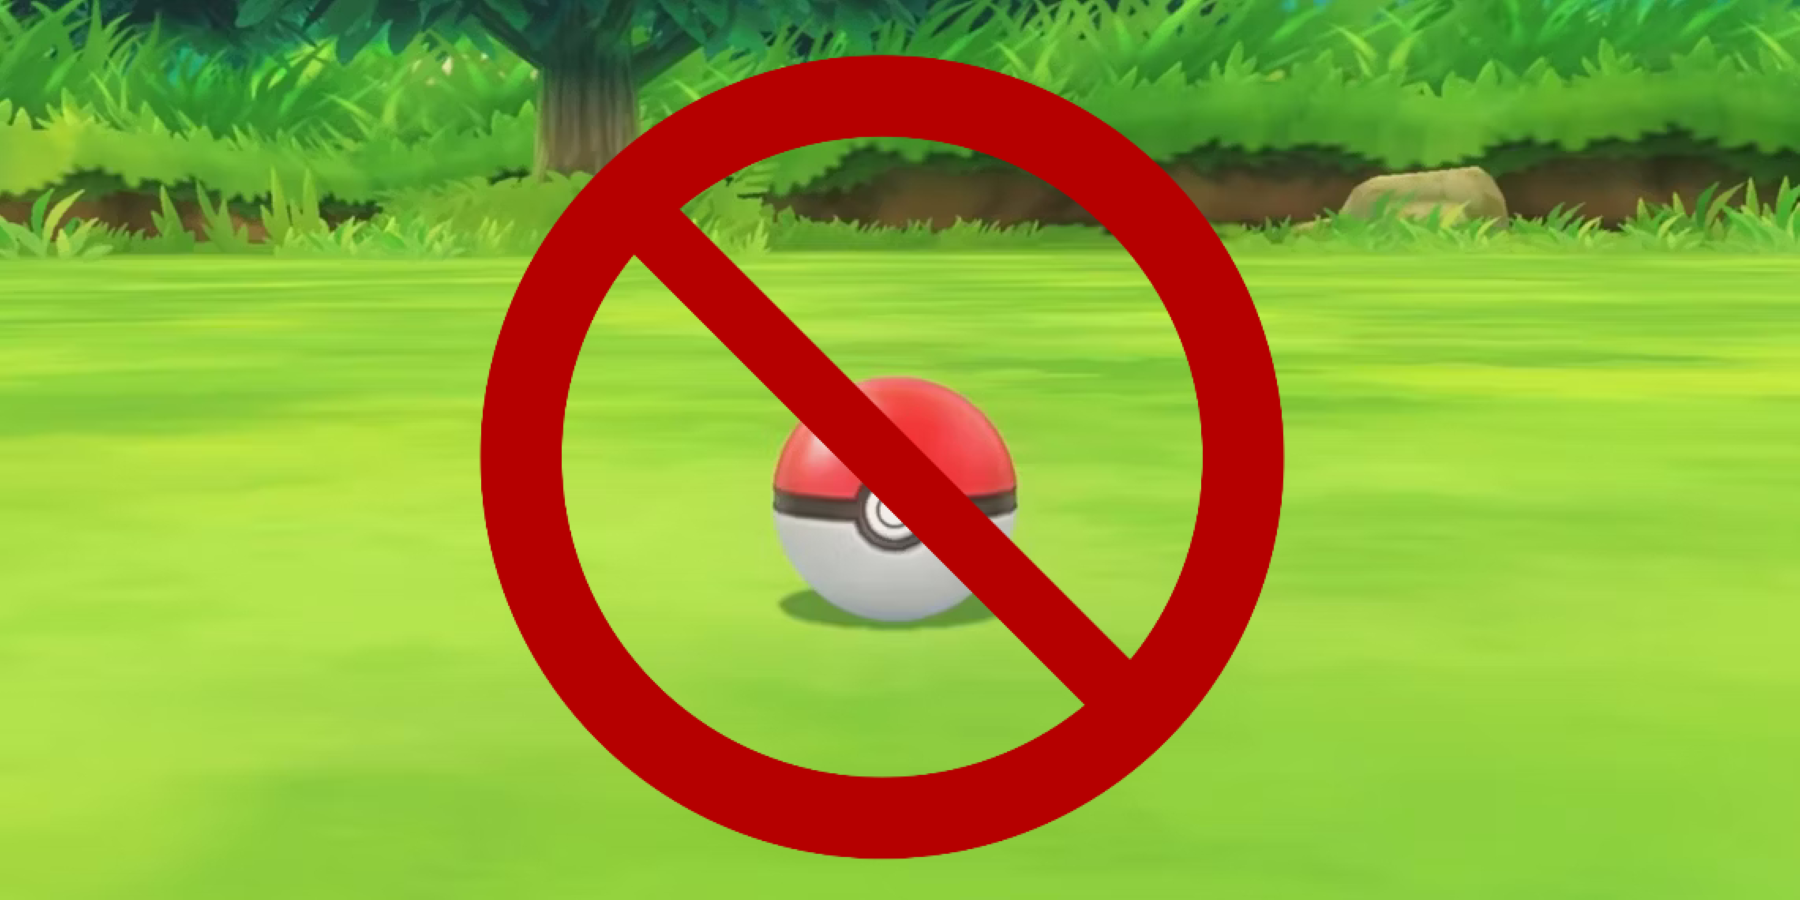 Screenshot of a Pokeball crossed out